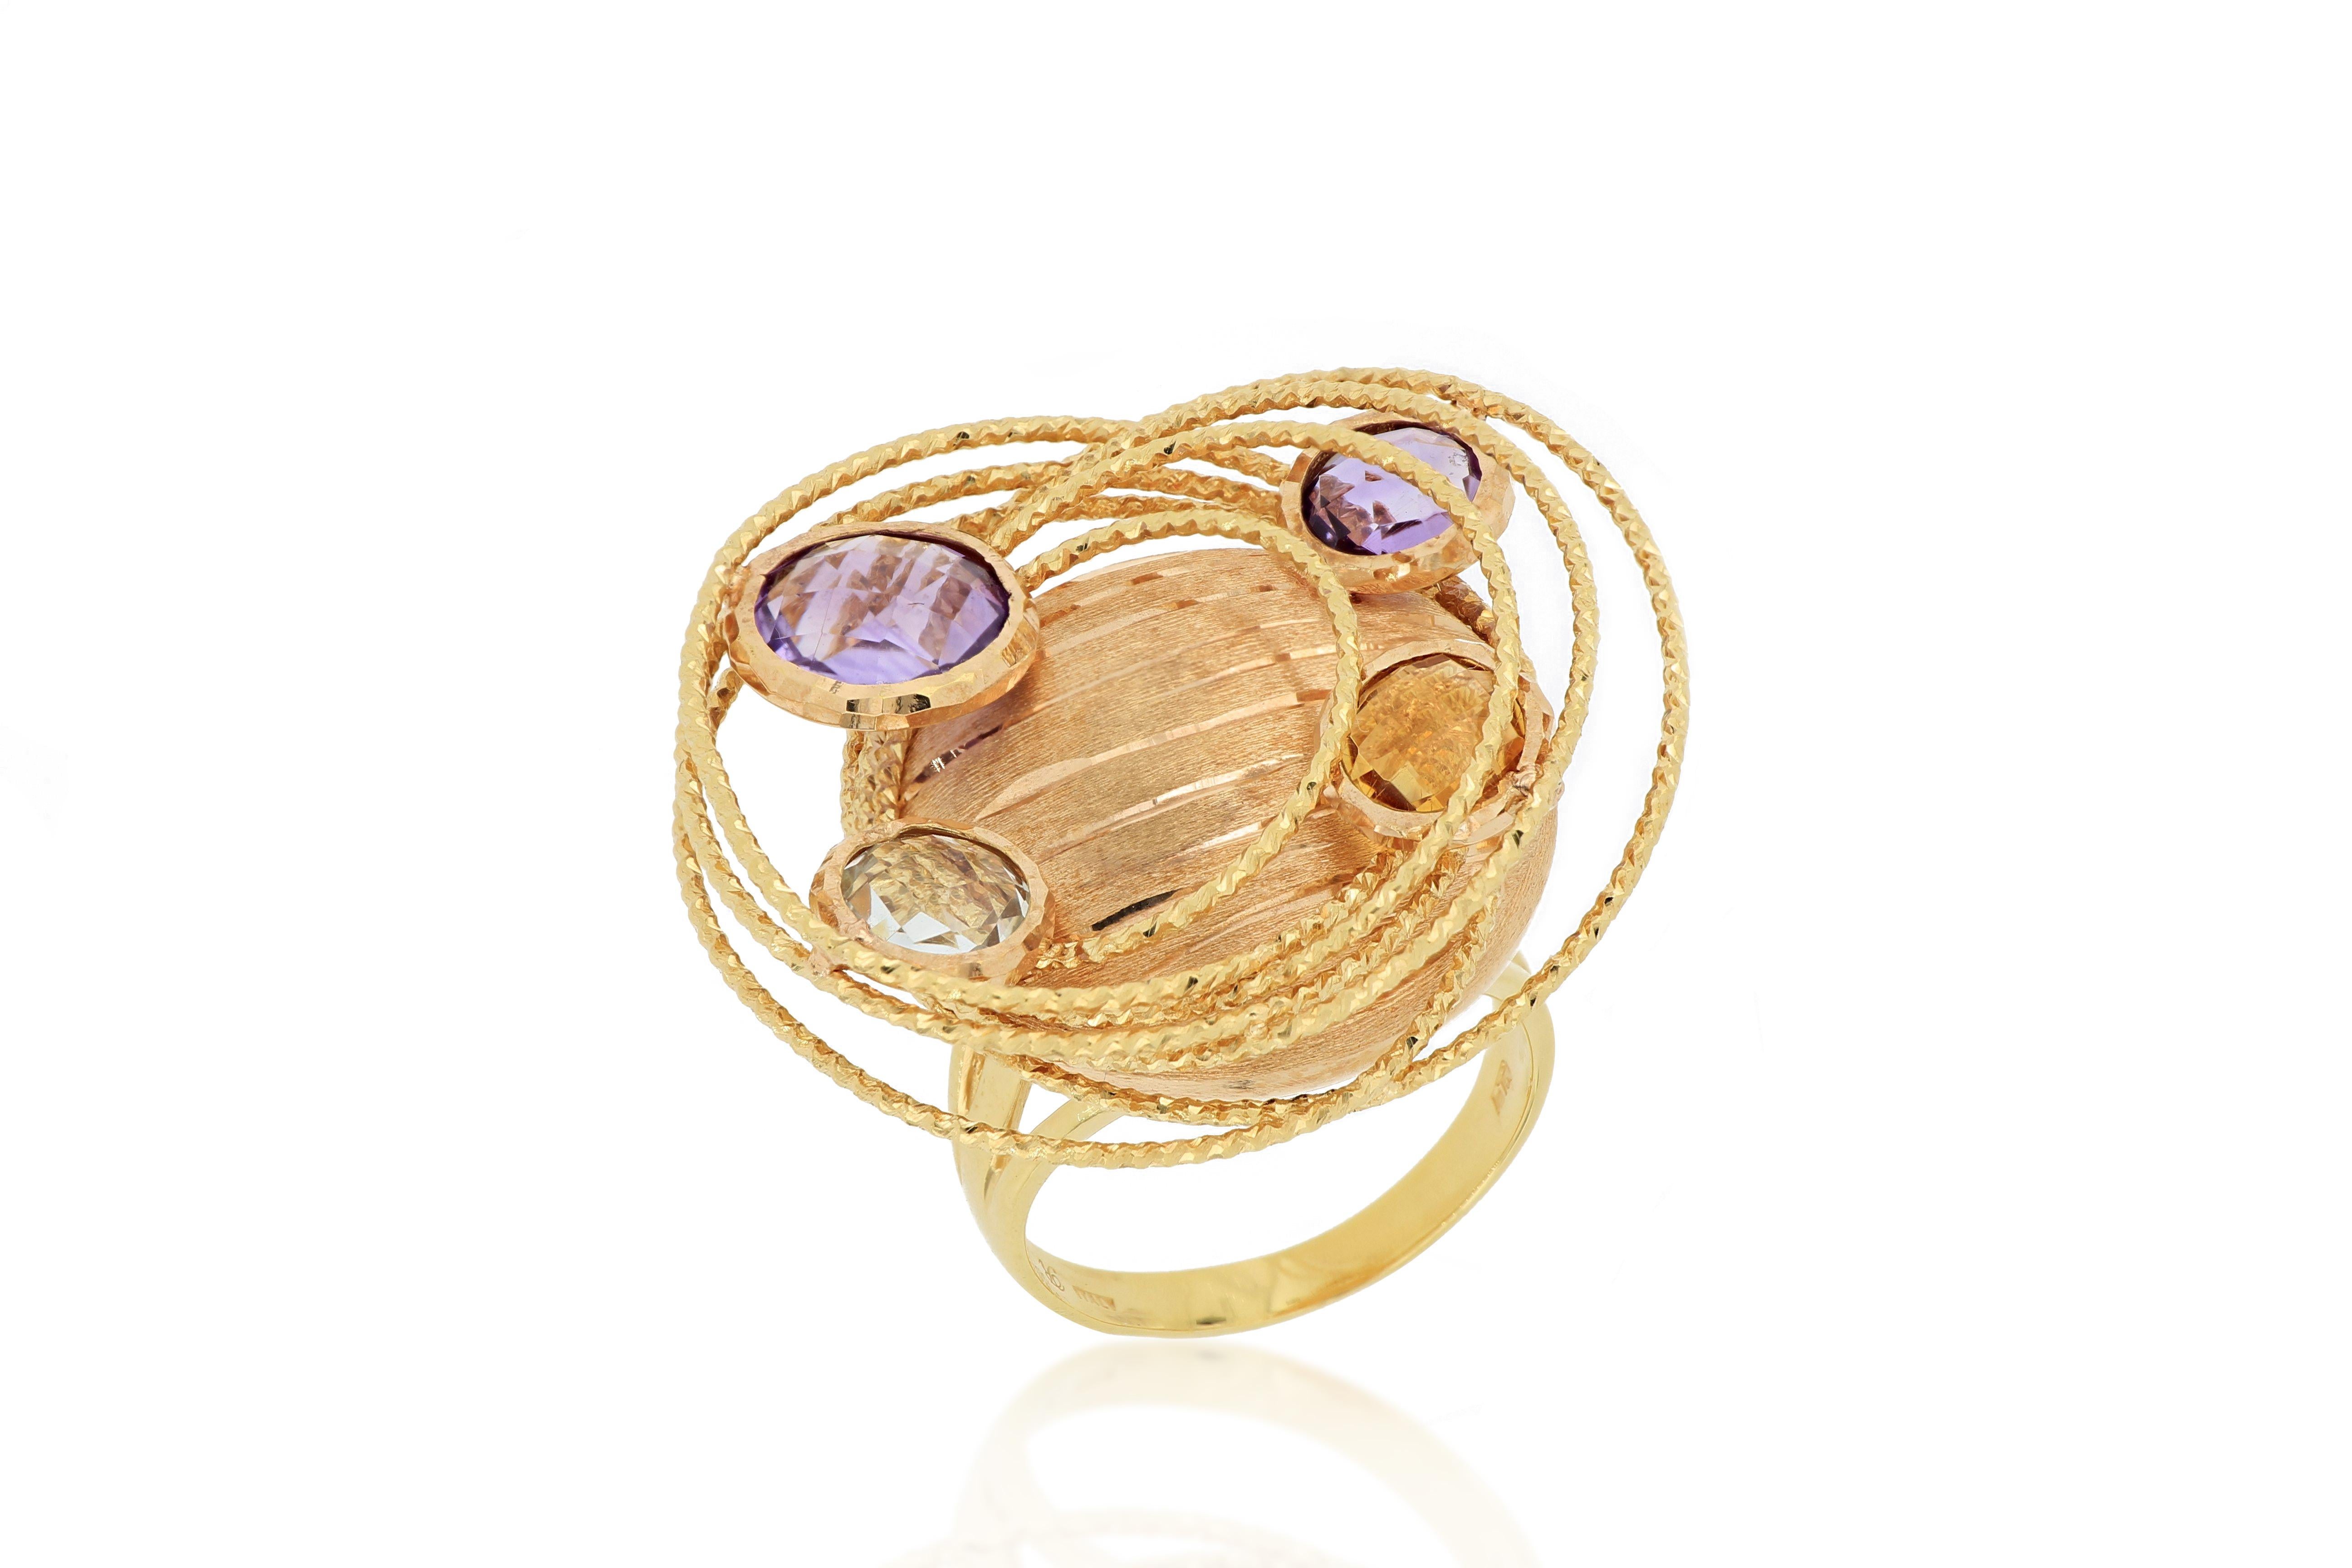 This very special ring is designed and made in Italy, with exquisite workmanship, embellished with amethyst, aquamarine, and topaz, mounted in 18 karat rose gold. A very unique and stylish cocktail ring. 
O’Che 1867 was founded one and a half